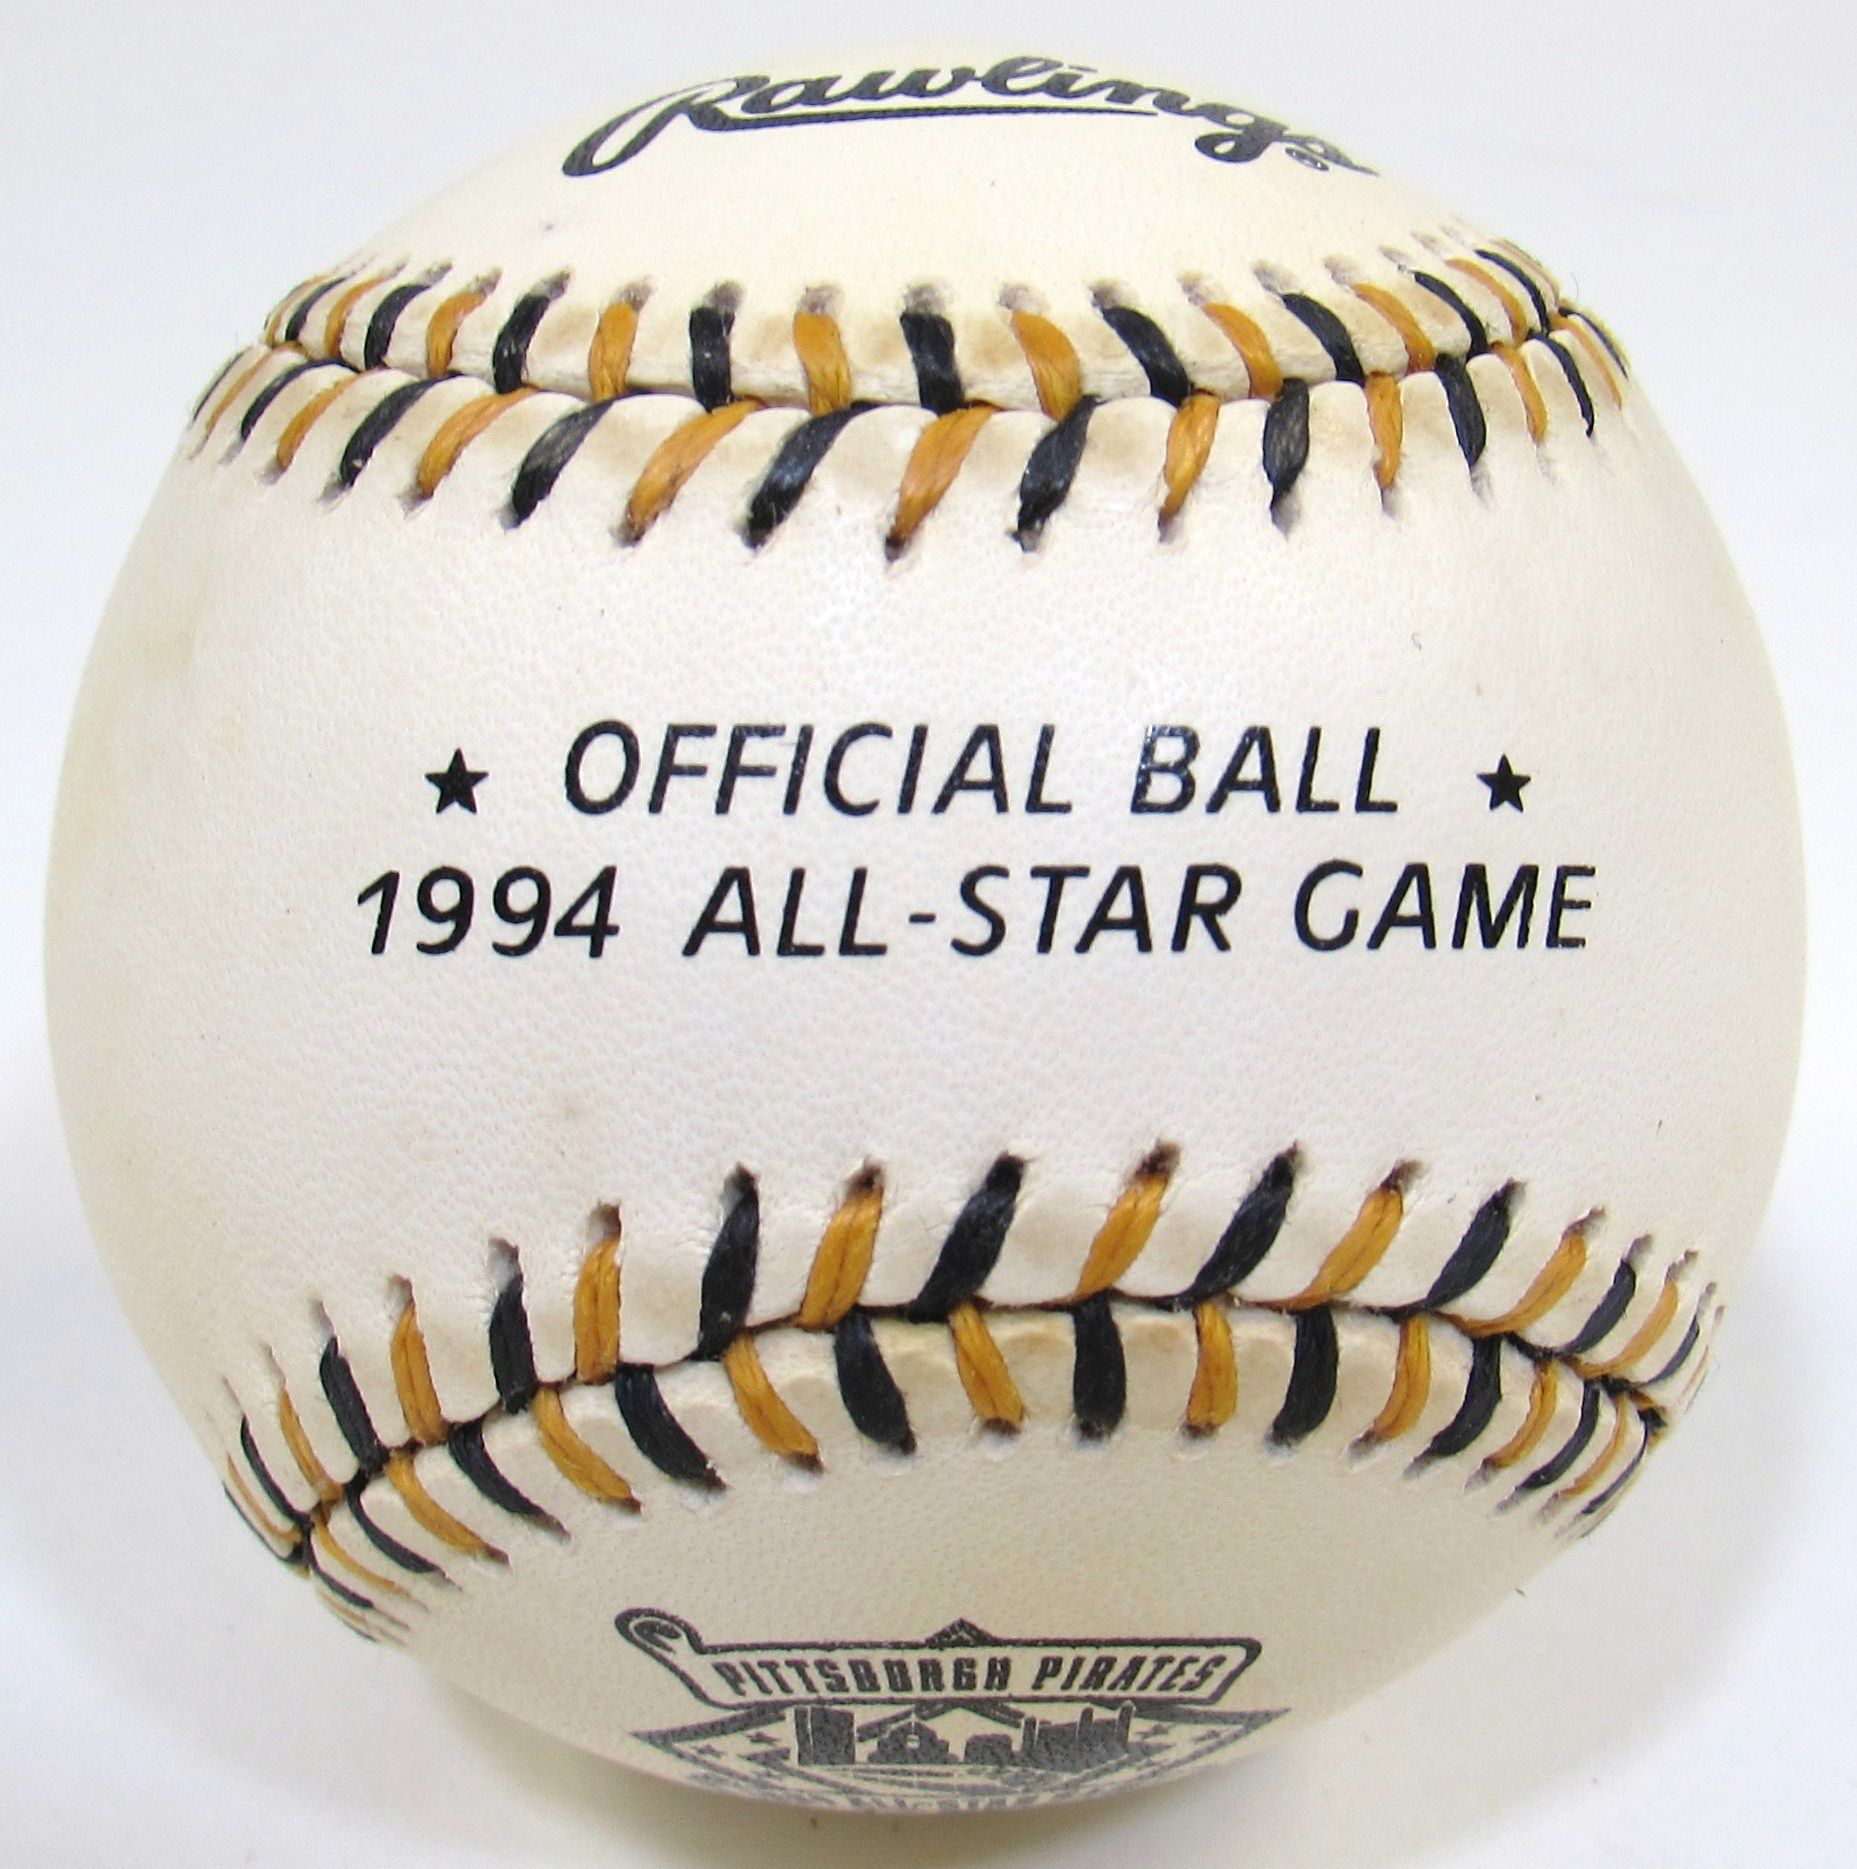 1994 MLB All-Star Baseball Signed by (32) All-Stars with Tony